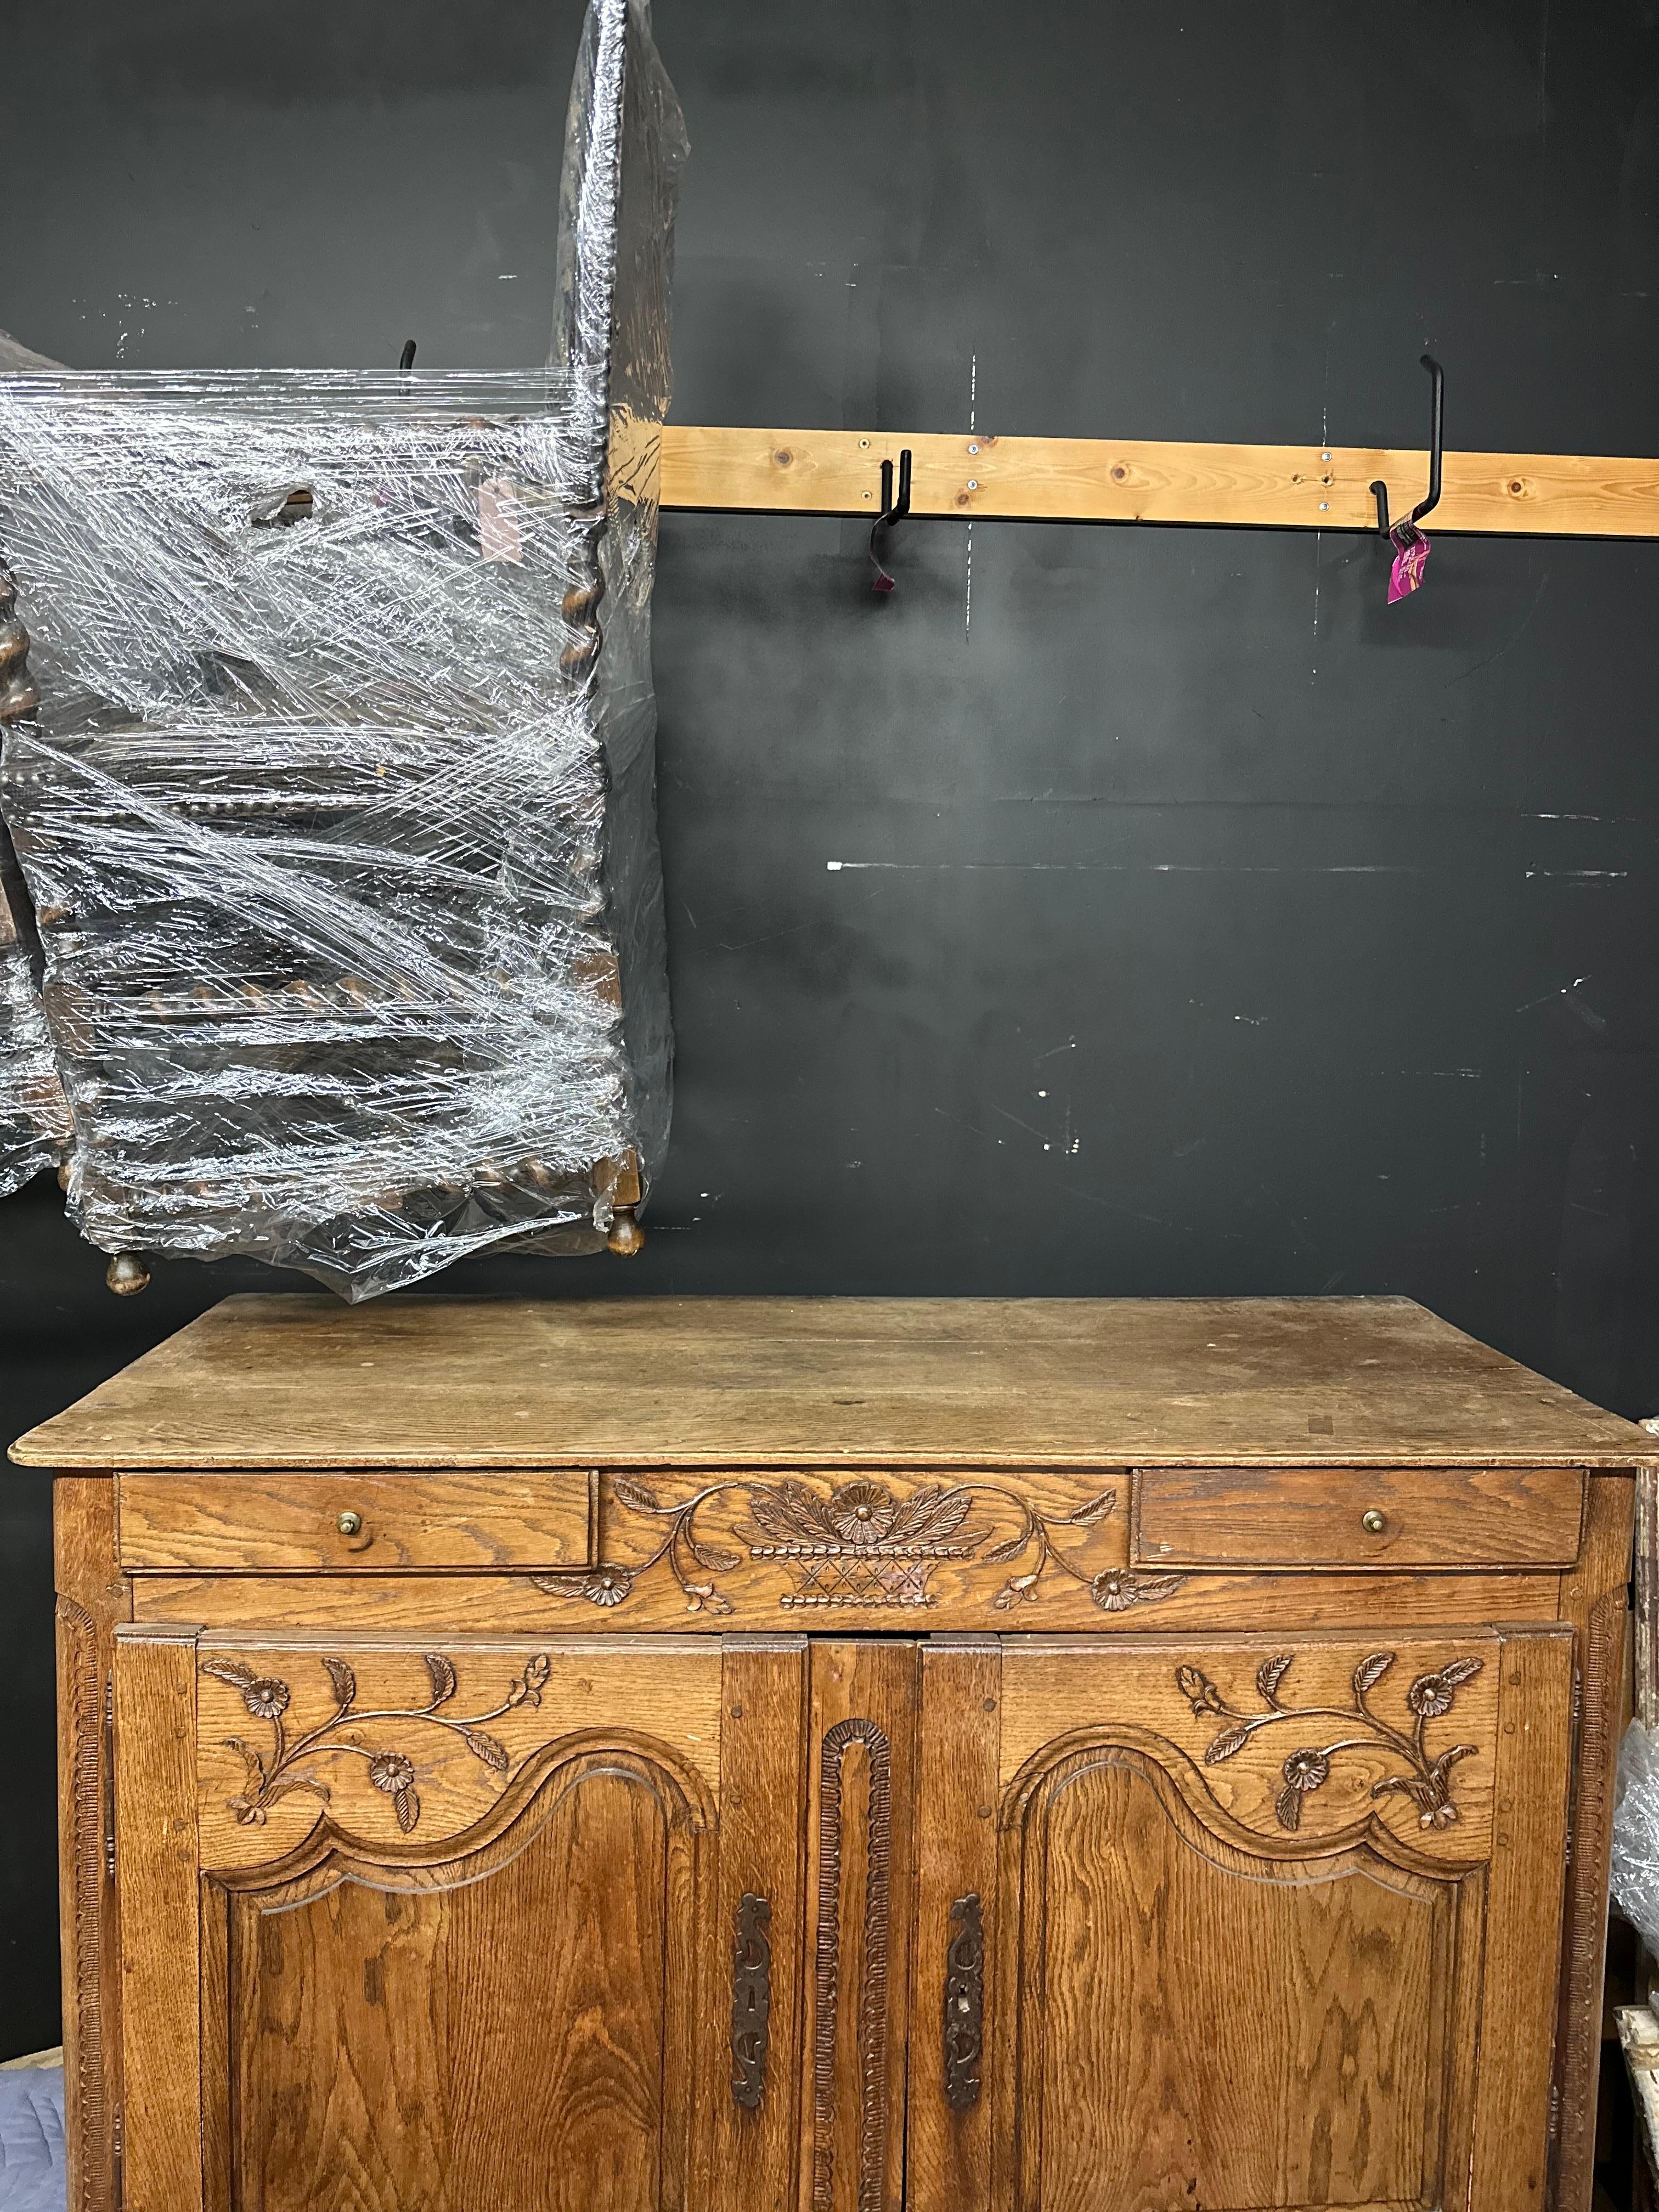 19th century French Sideboard with two front doors and two drawers. Beautiful character to the wood and fine hand-carvings on the top and bottom scalloped apron.